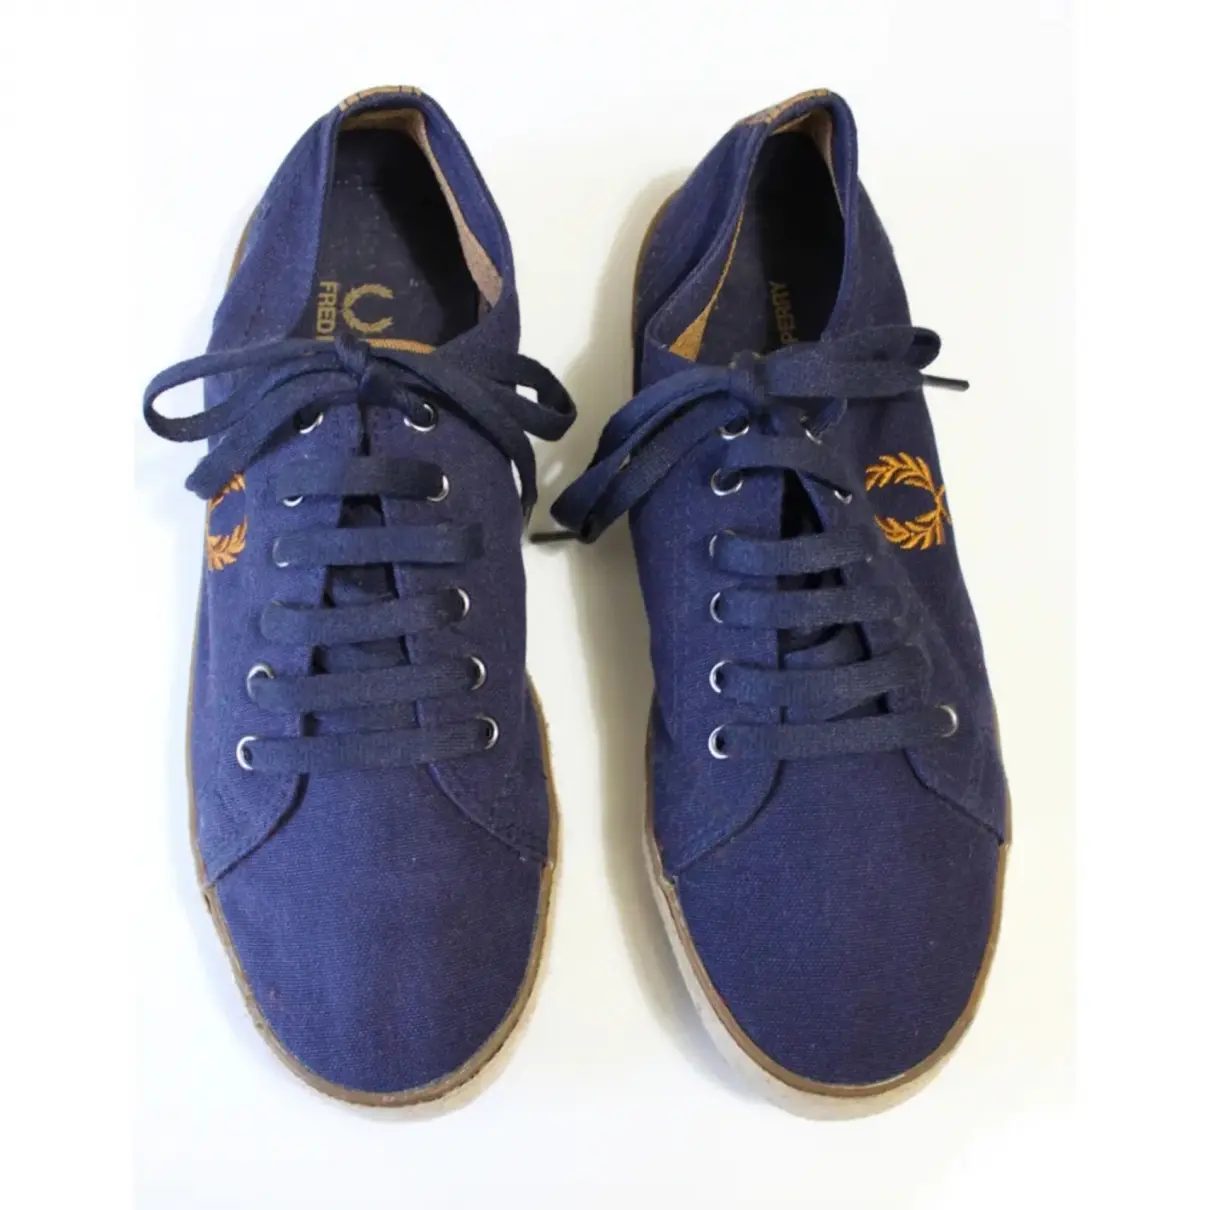 Buy Fred Perry Cloth trainers online